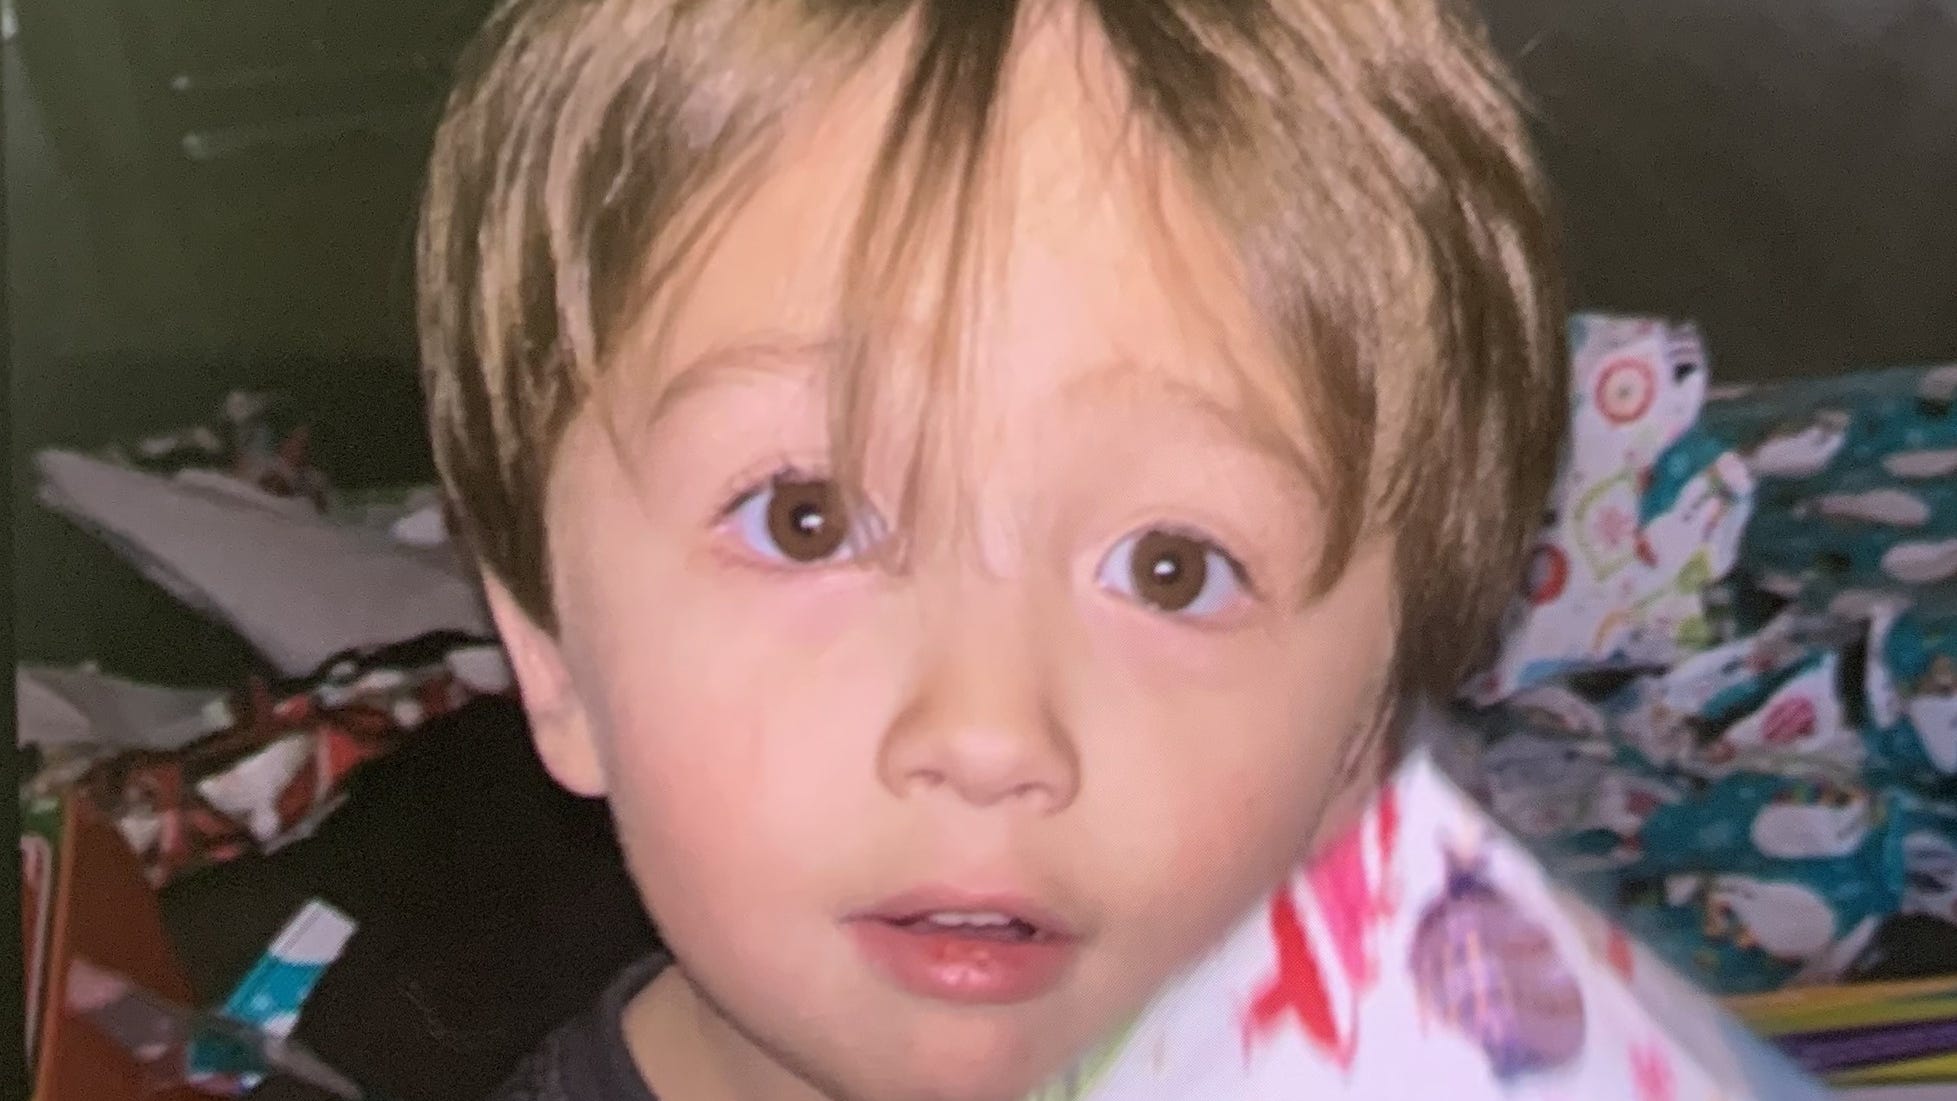 Elijah Vue has been missing for 2 months in Two Rivers. Police continue to look for him.